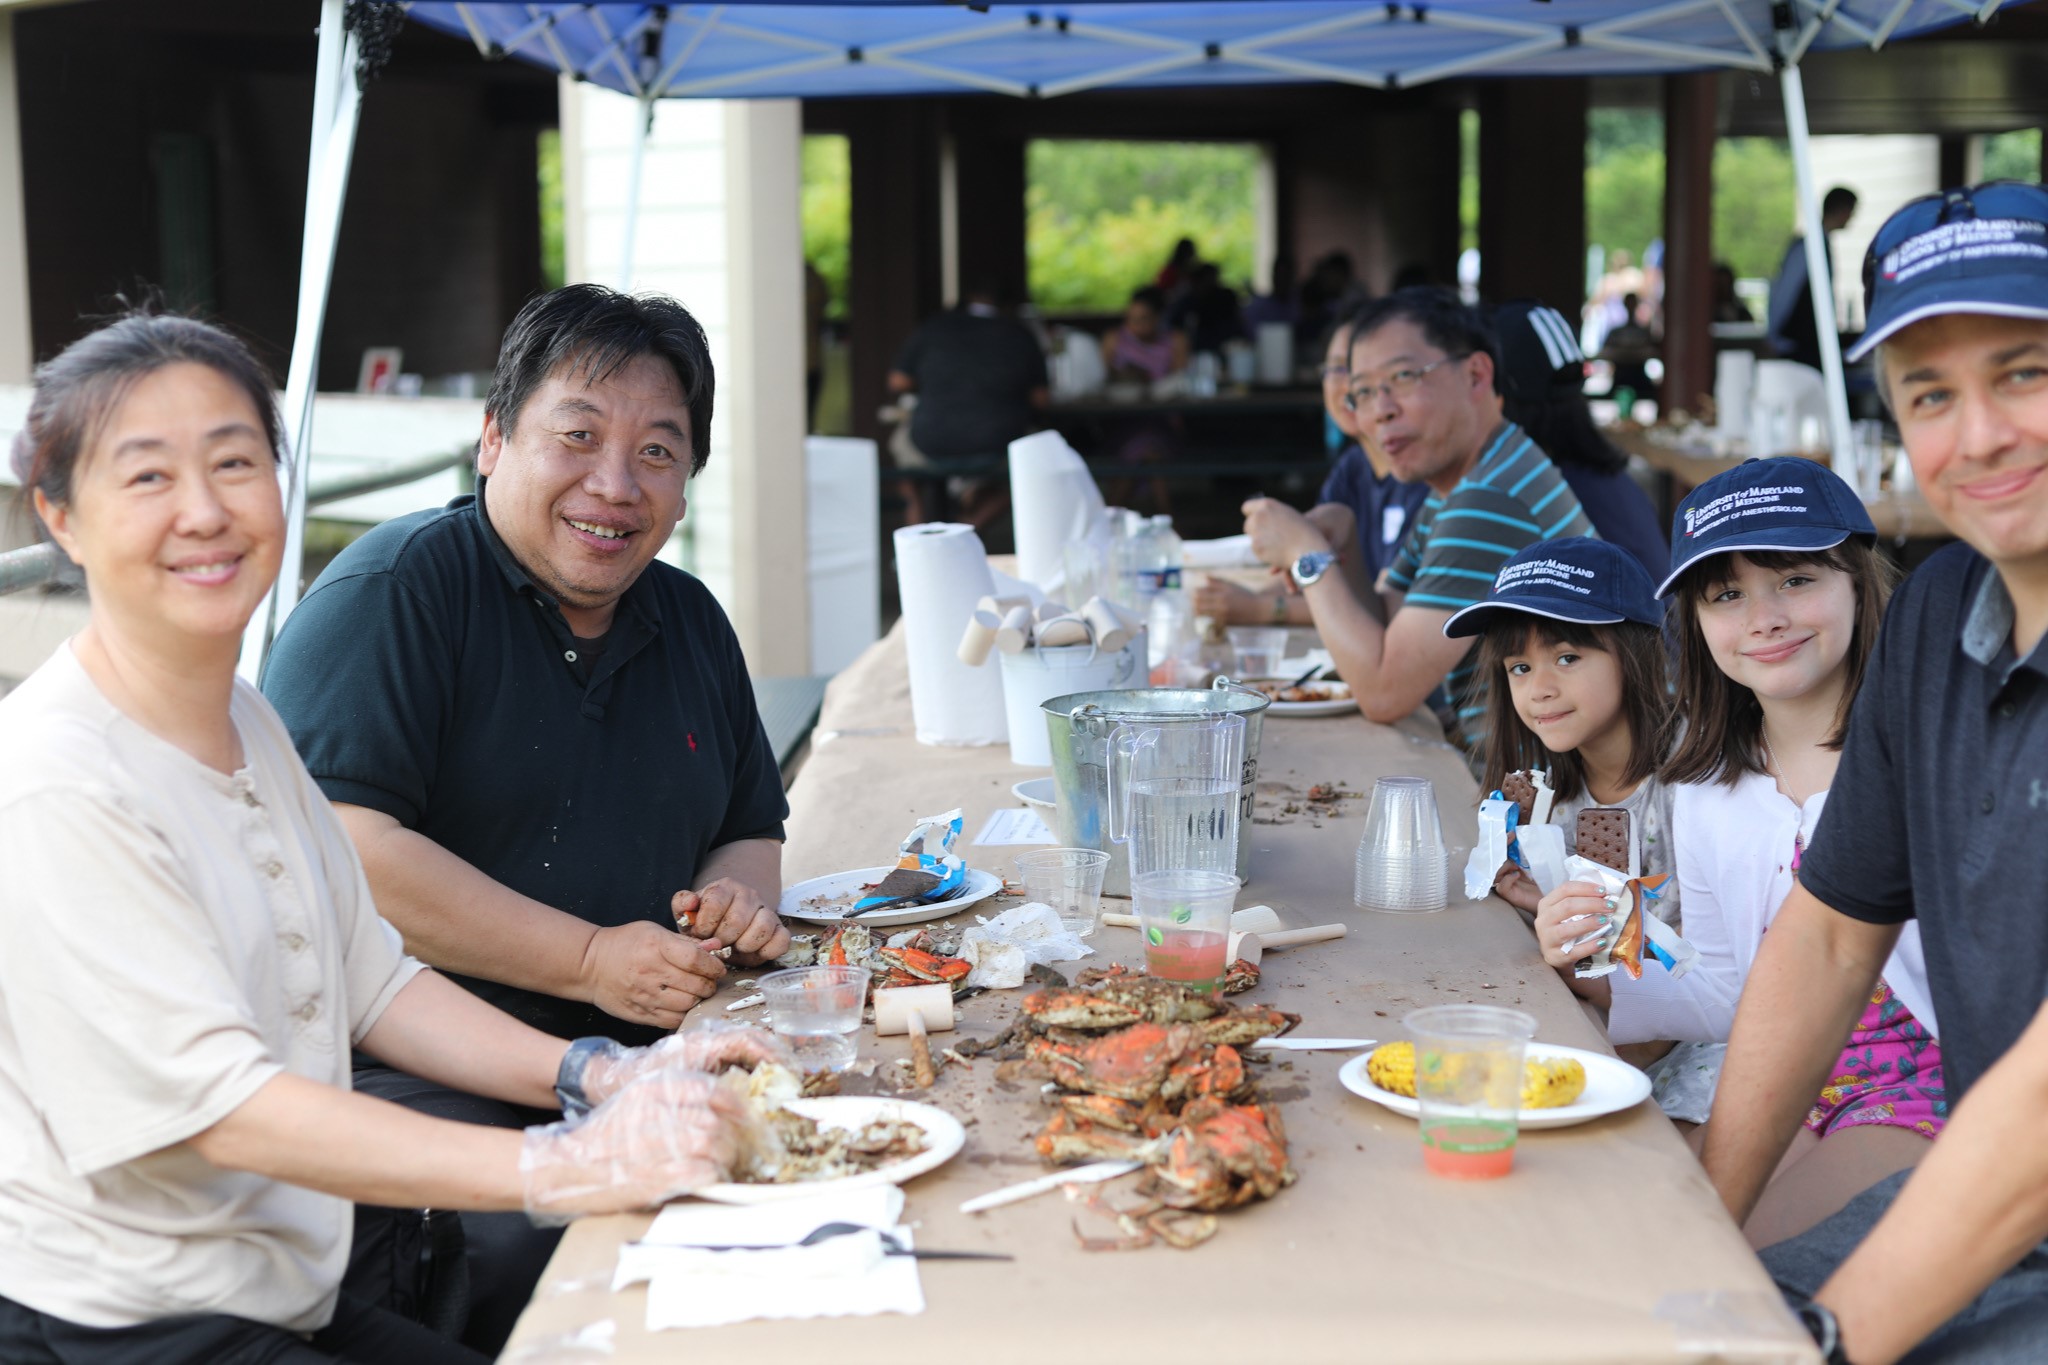 Families enjoying crabs and other goodies